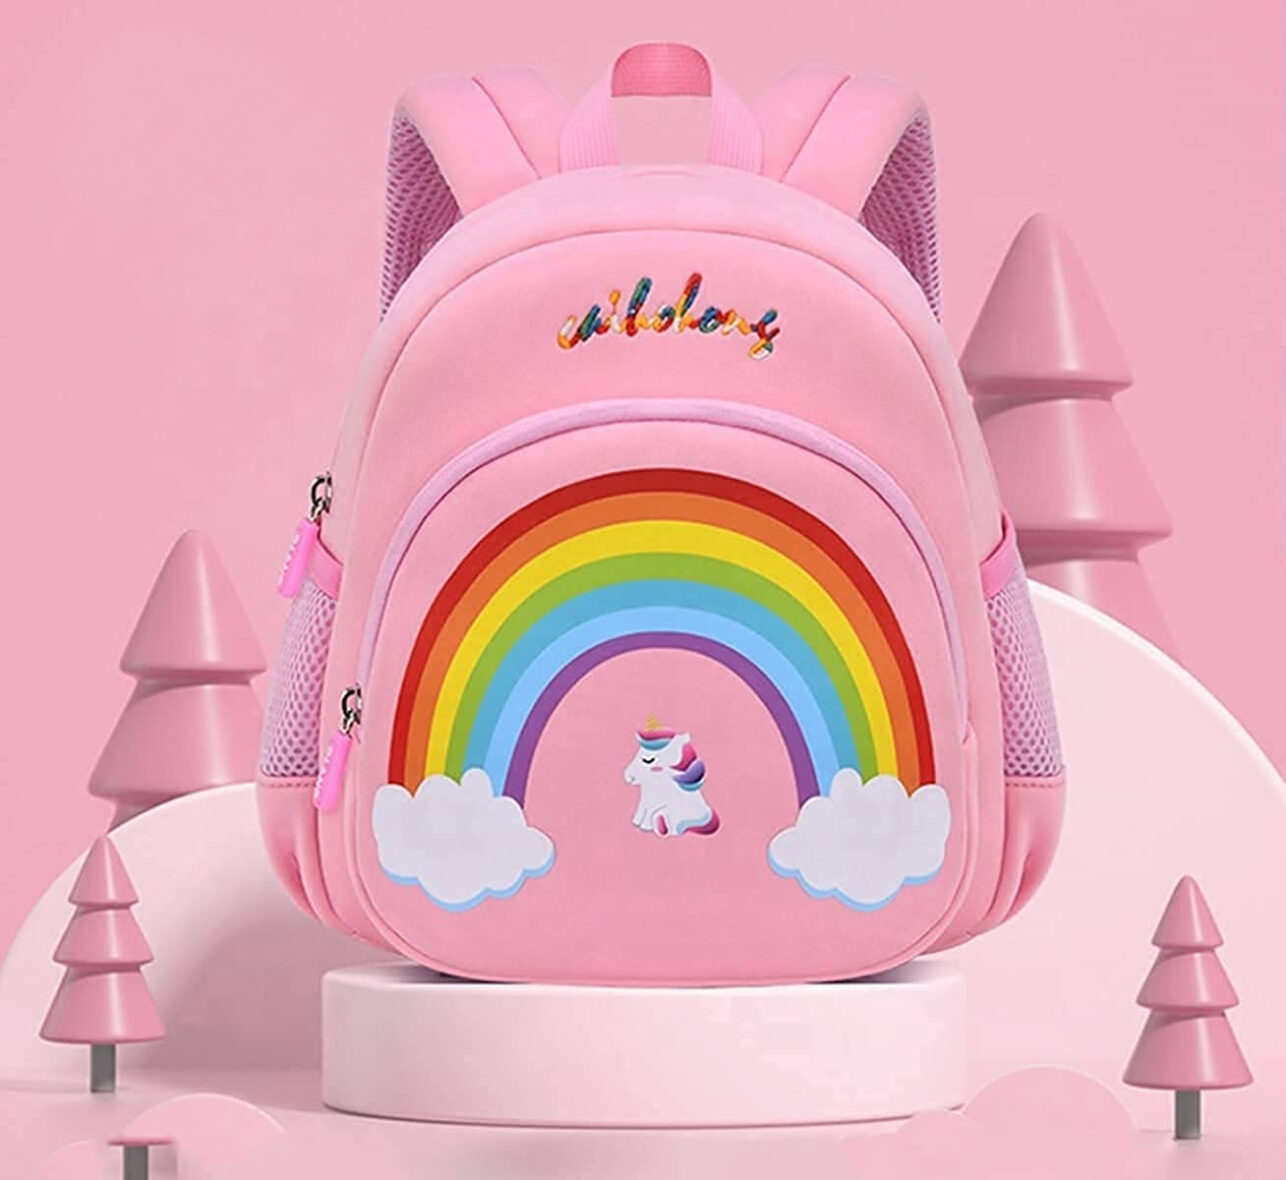 U smile Toddler Backpack, My Dreamy Unicorn, Baby Boys Girls Kindergarten Pre School Bag for Toddlers Age 2 to 5 Years, Purple 2 7